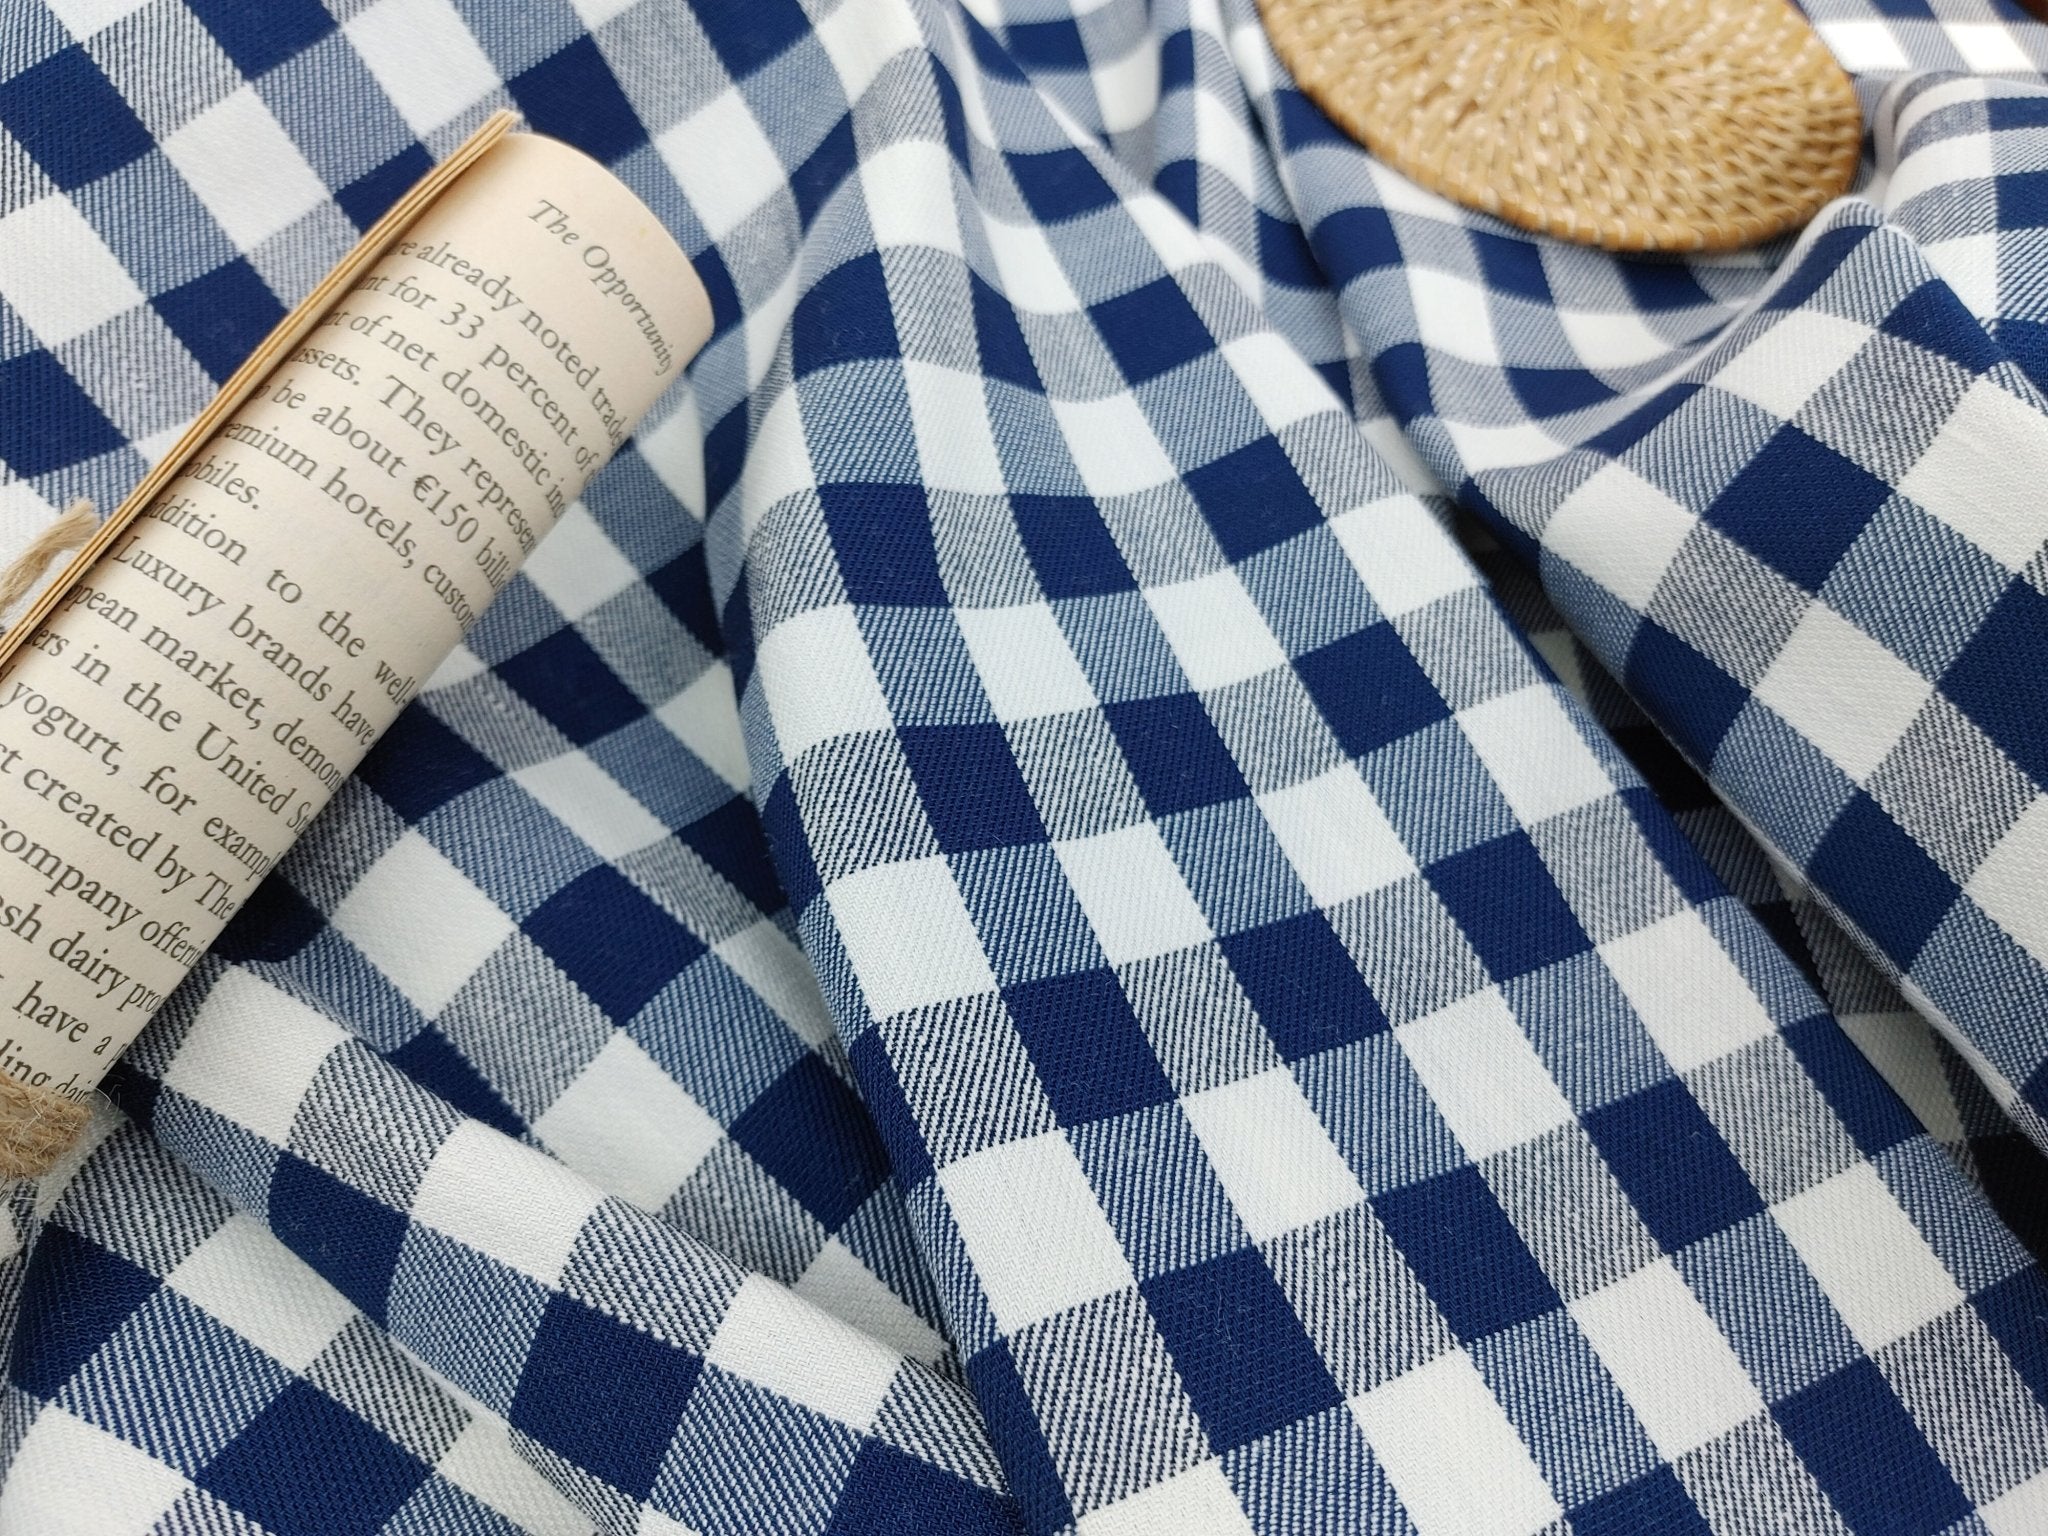 Linen Twill Stretch Fabric with Gingham Check - Medium Weight 7633 7634 - The Linen Lab - Blue